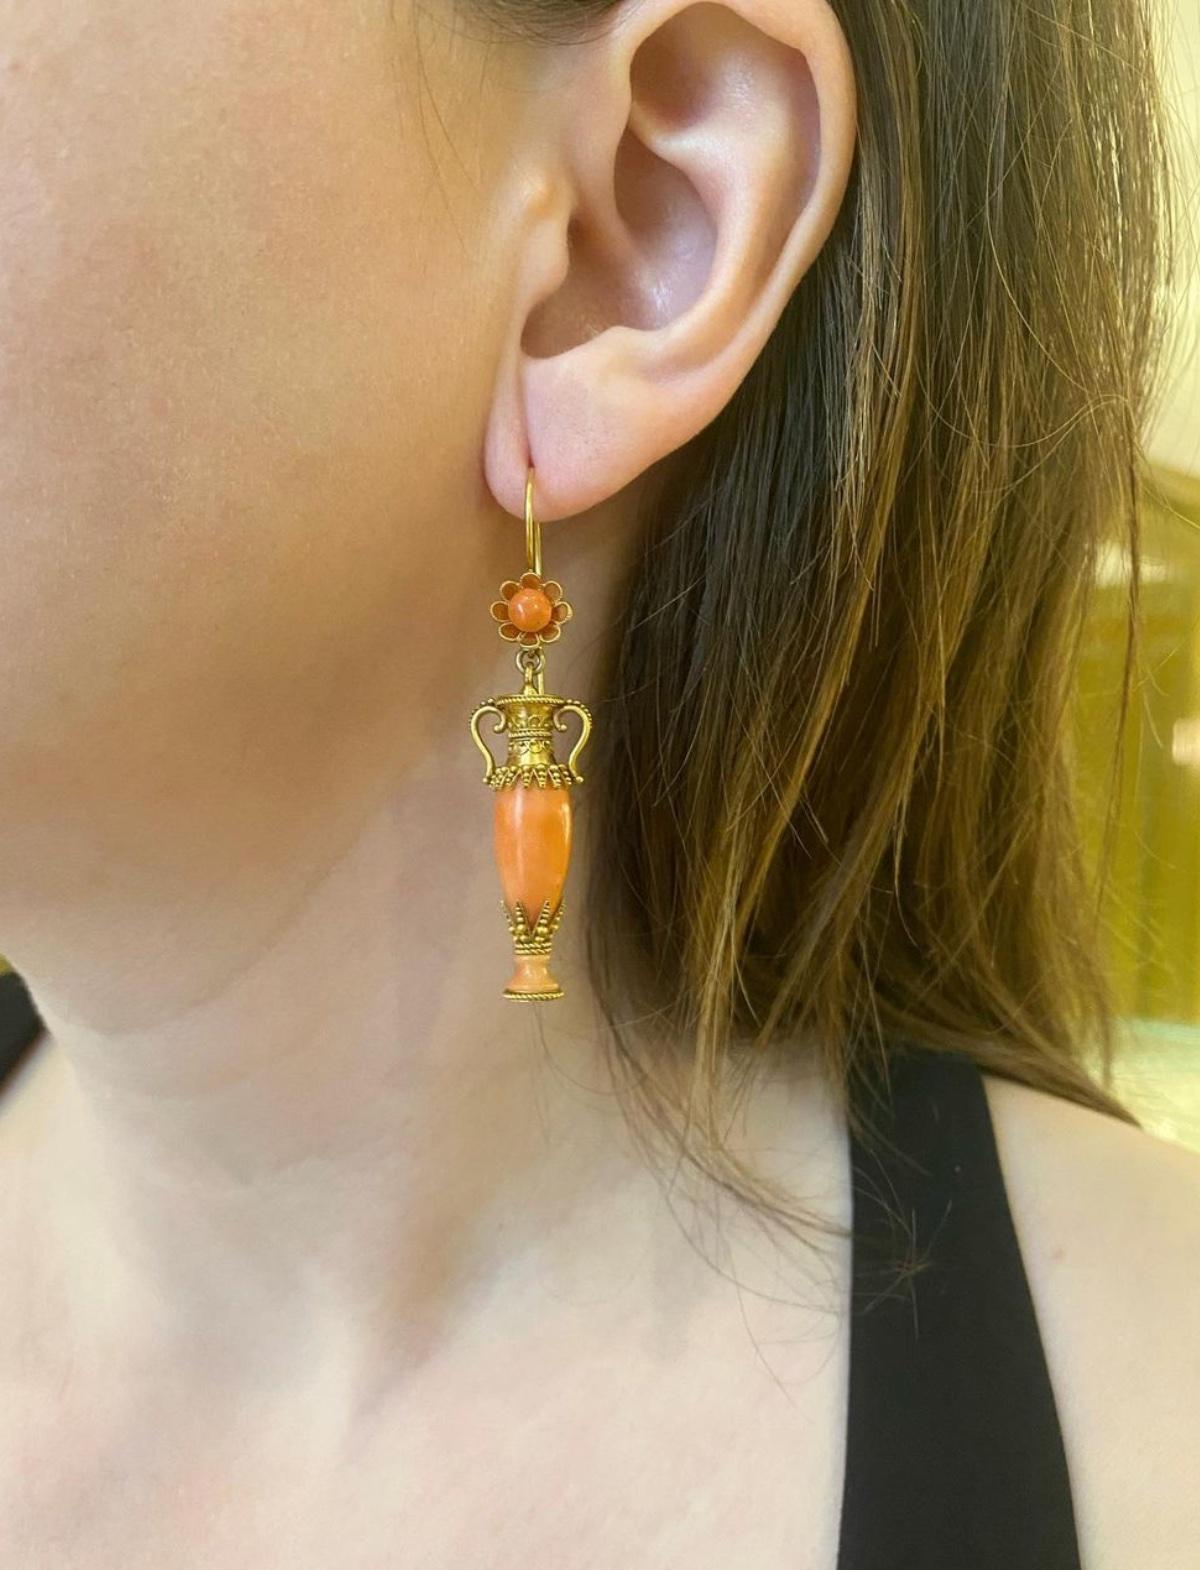 Antique Etruscan Revival Gold and Coral Earrings with Urn-Shaped Pendants In Good Condition For Sale In New York, NY